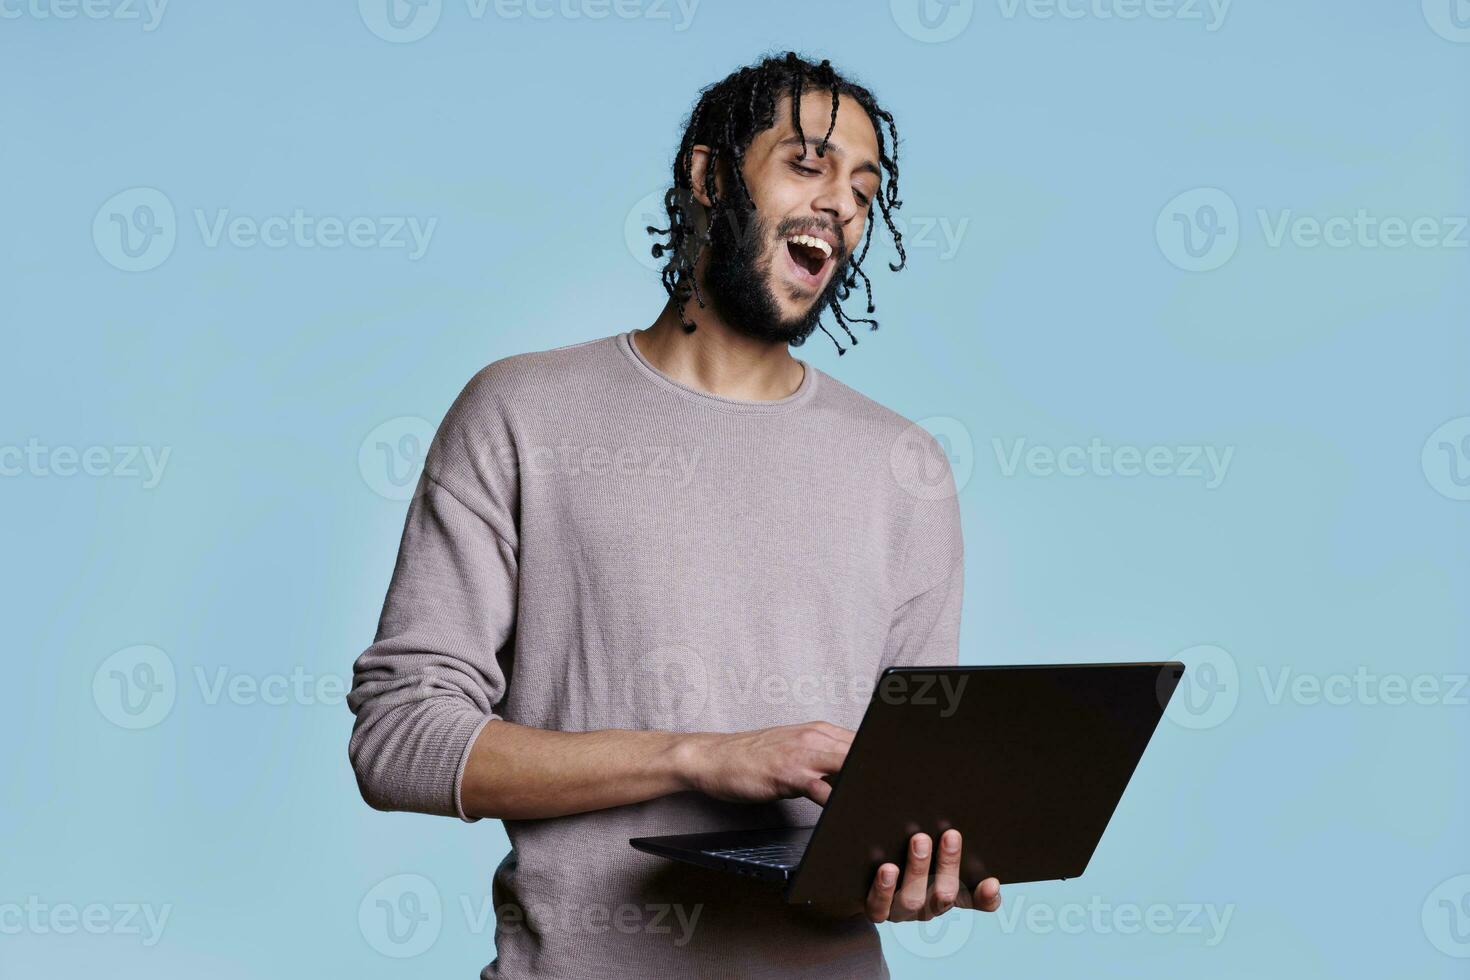 Happy arab man holding laptop and having fun communication in video call. Smiling person with cheerful facial expression holding portable computer and talking in online meeting photo